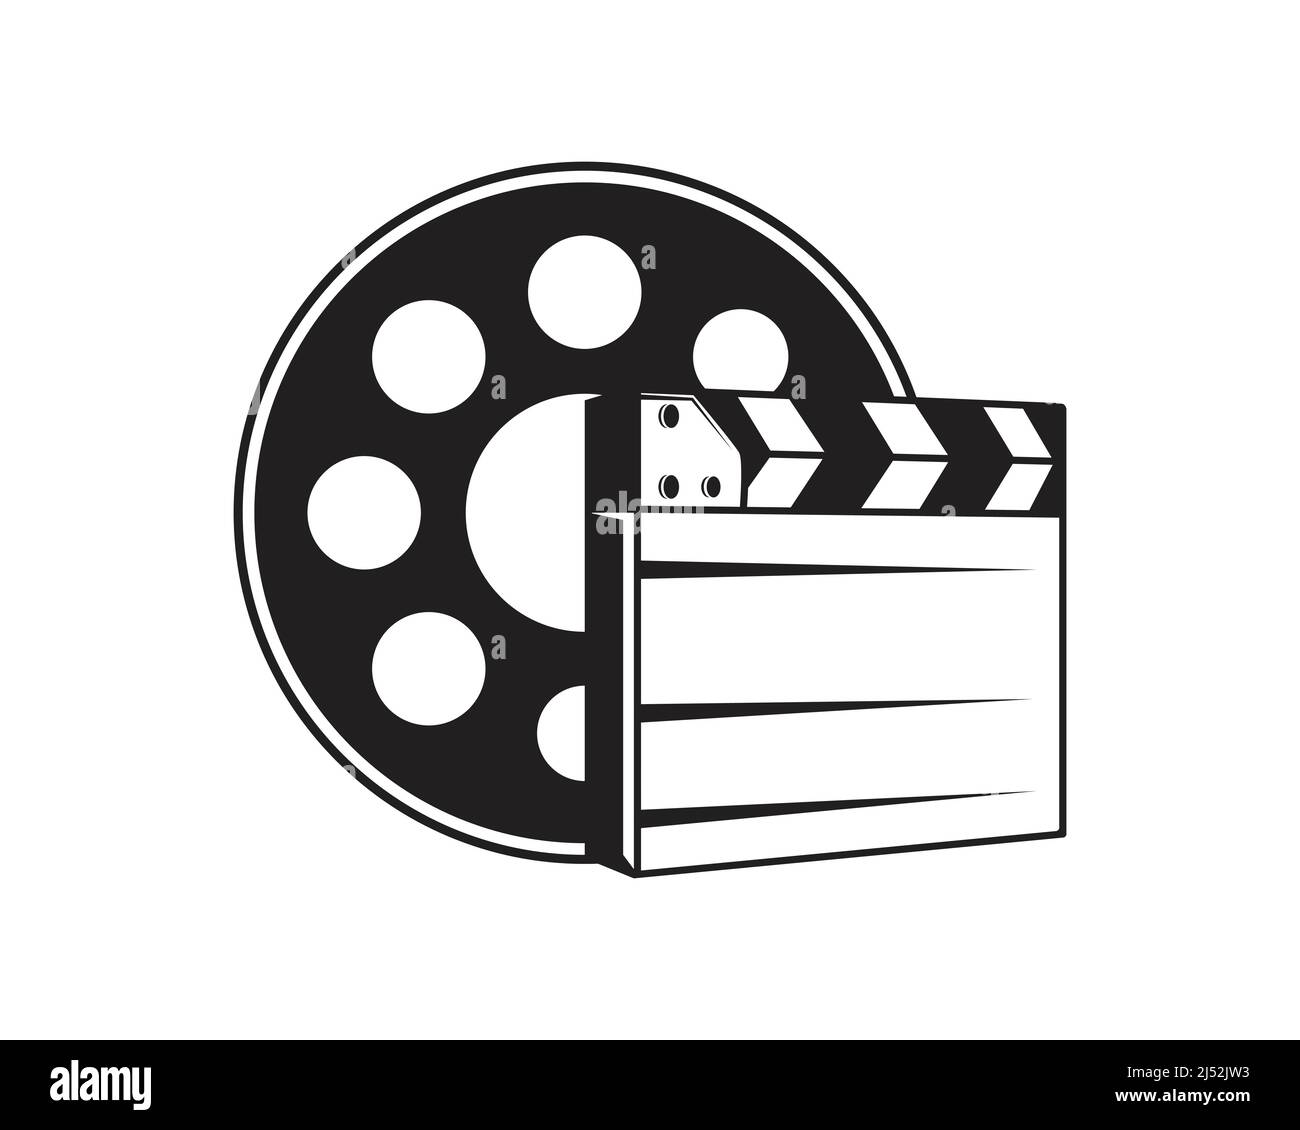 Clapperboard with Film Roll Illustration with Silhouette Style Vector Stock Vector